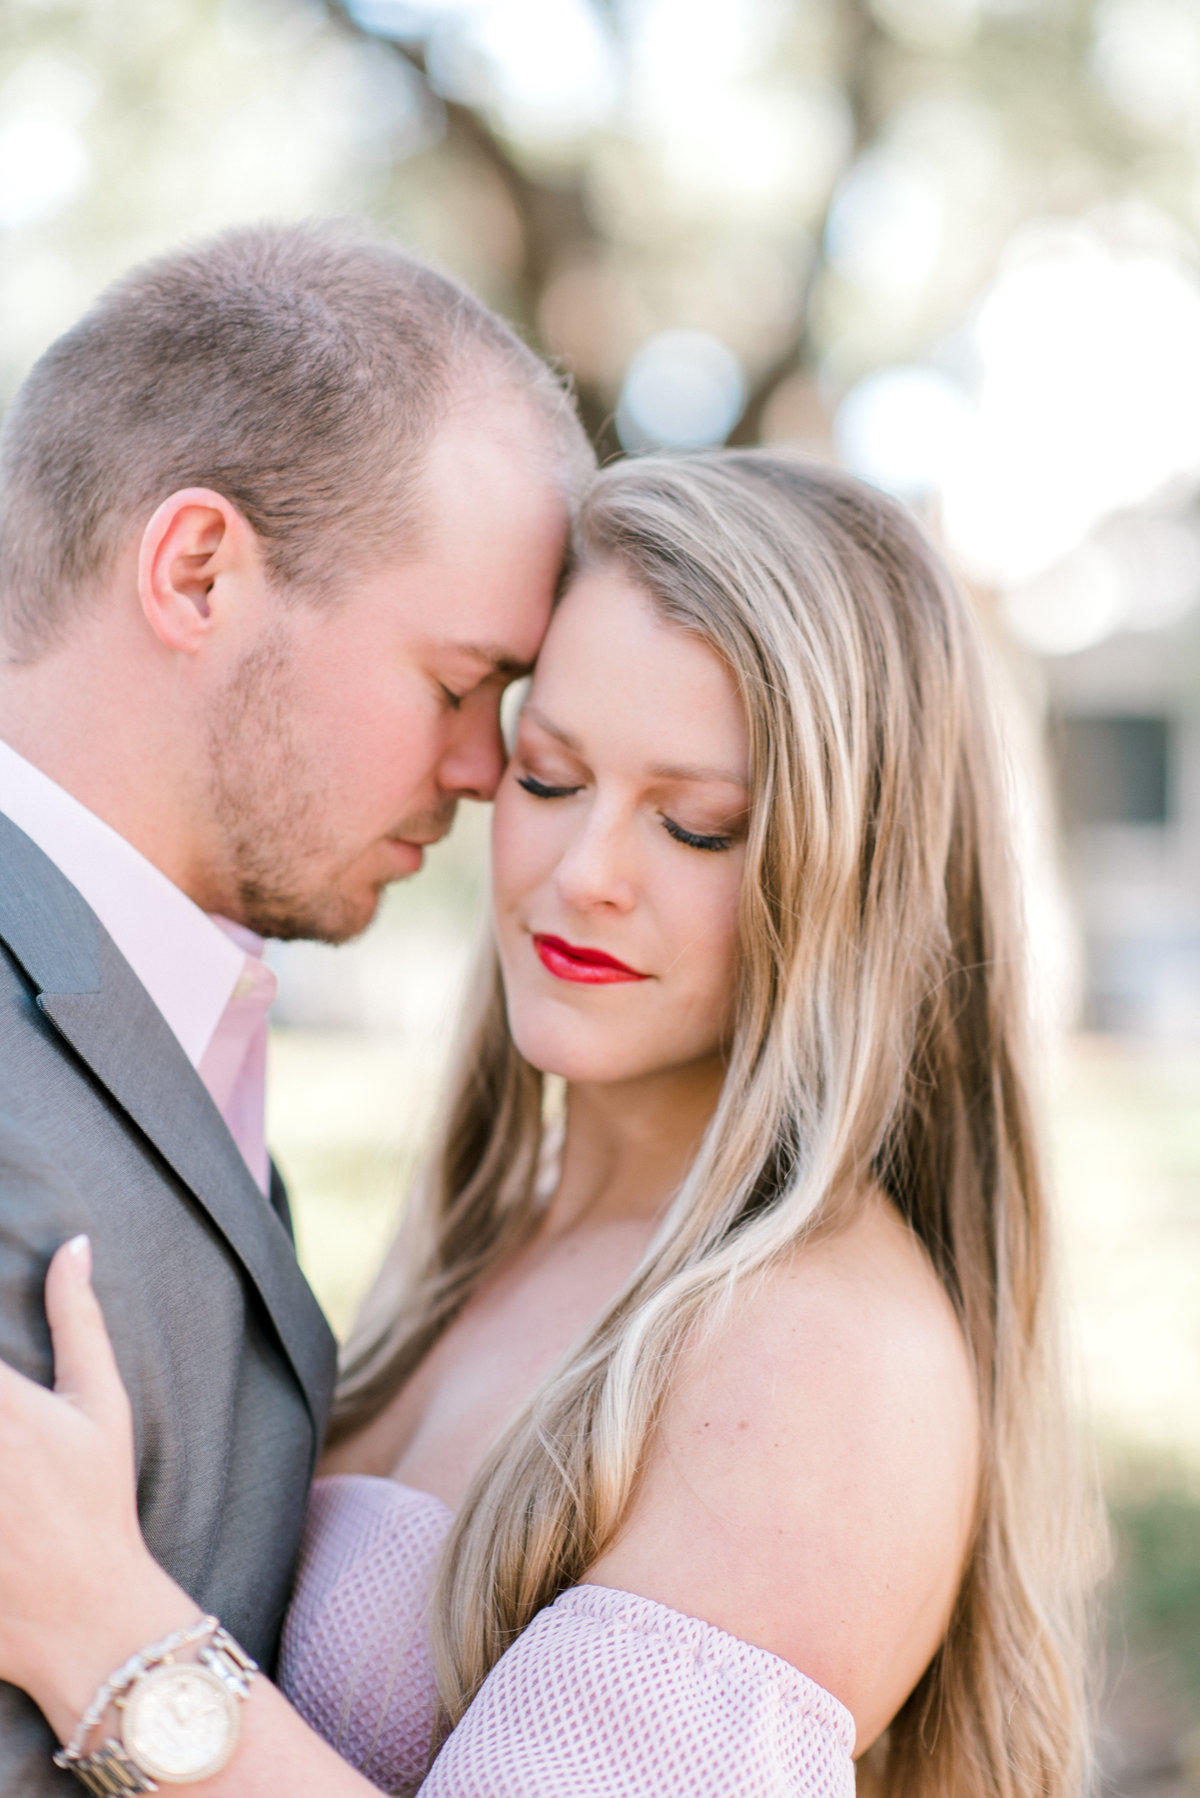 Tender moment between couple during engagement session